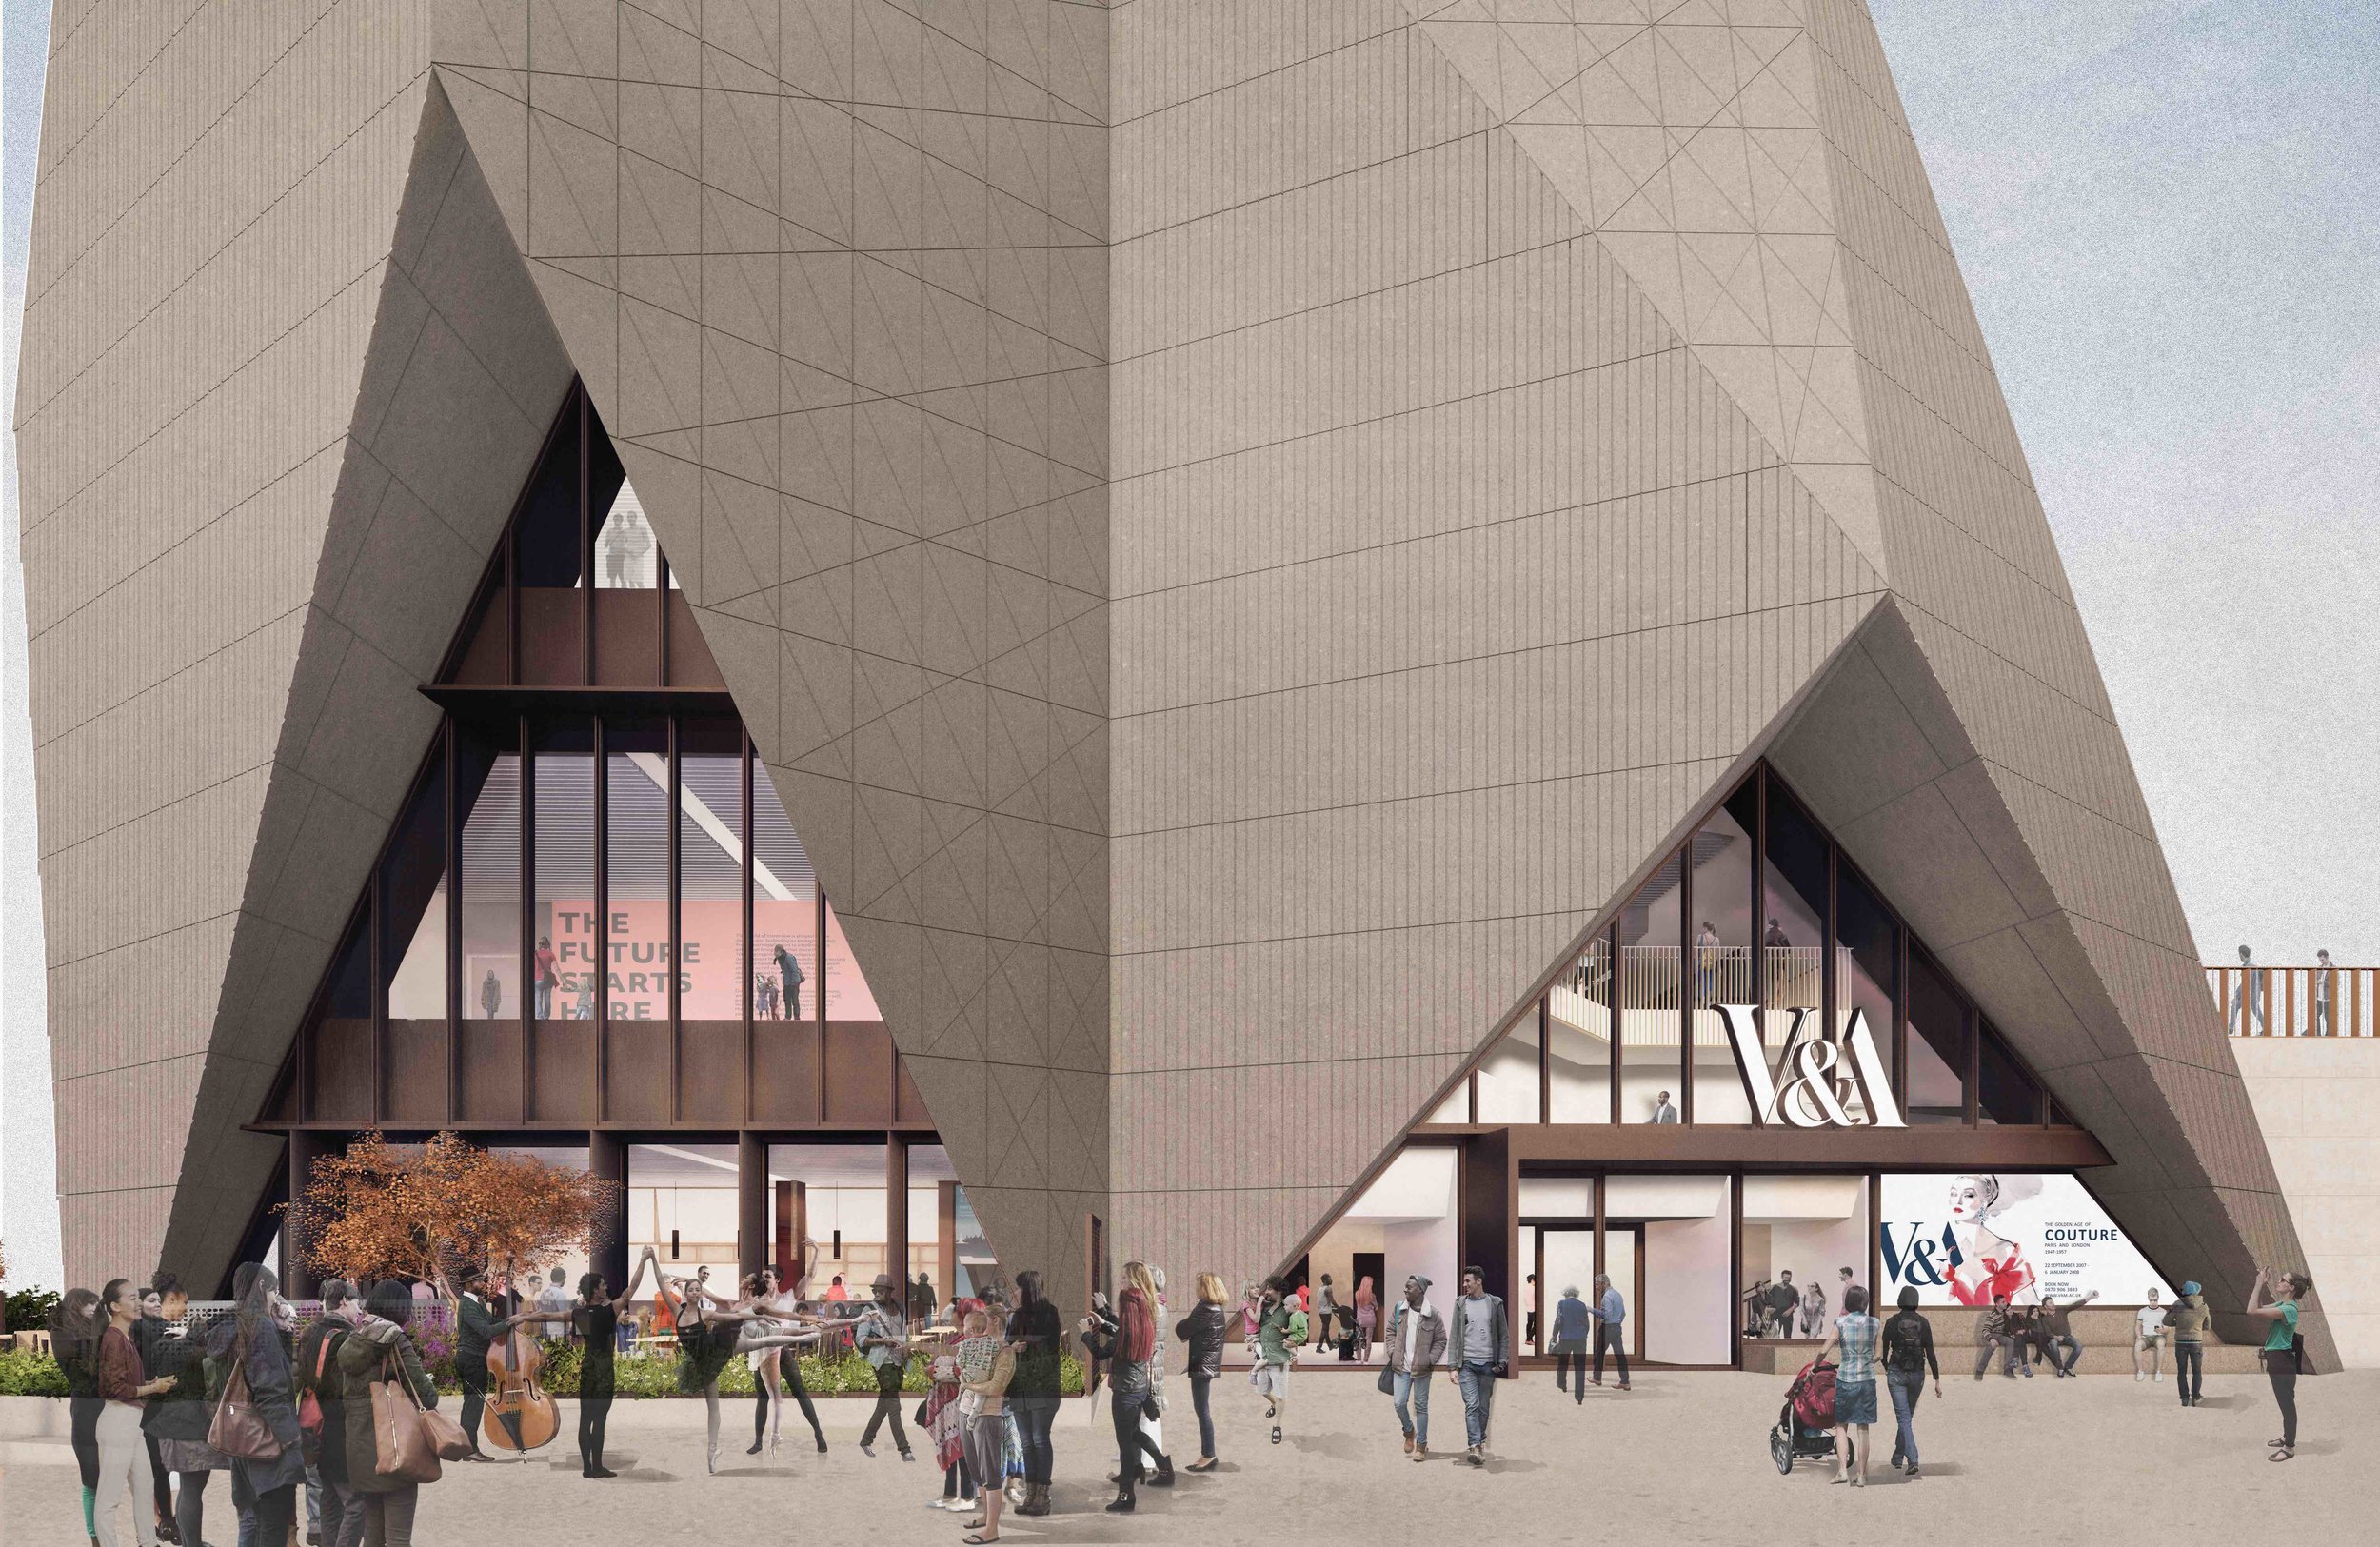  The  V&amp;A East  project will create two new purpose-built sites in Queen Elizabeth Olympic Park, London – a brand-new museum at Stratford Waterfront (including a landmark partnership with the US-based  Smithsonian Institution ), and a vast new co